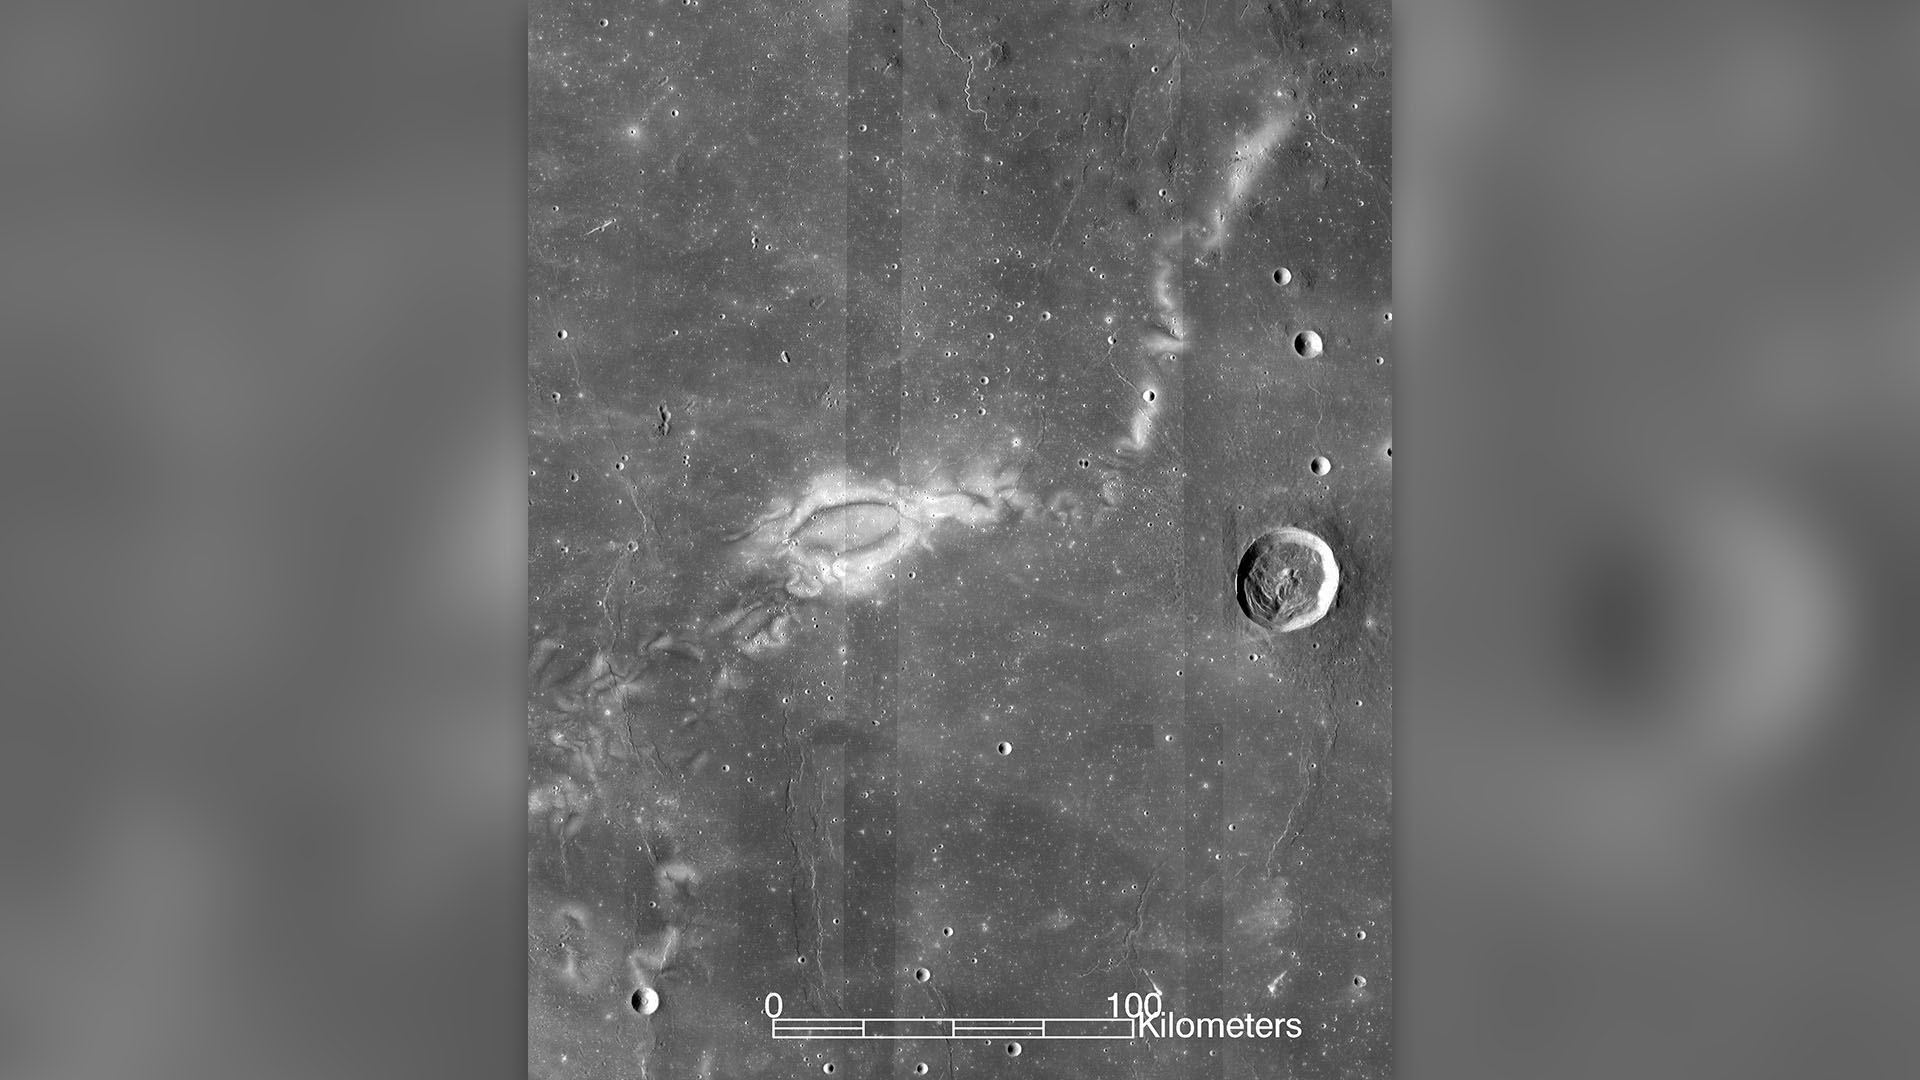 The mysterious “lunar vortices” that have puzzled scientists for decades may be close to an explanation